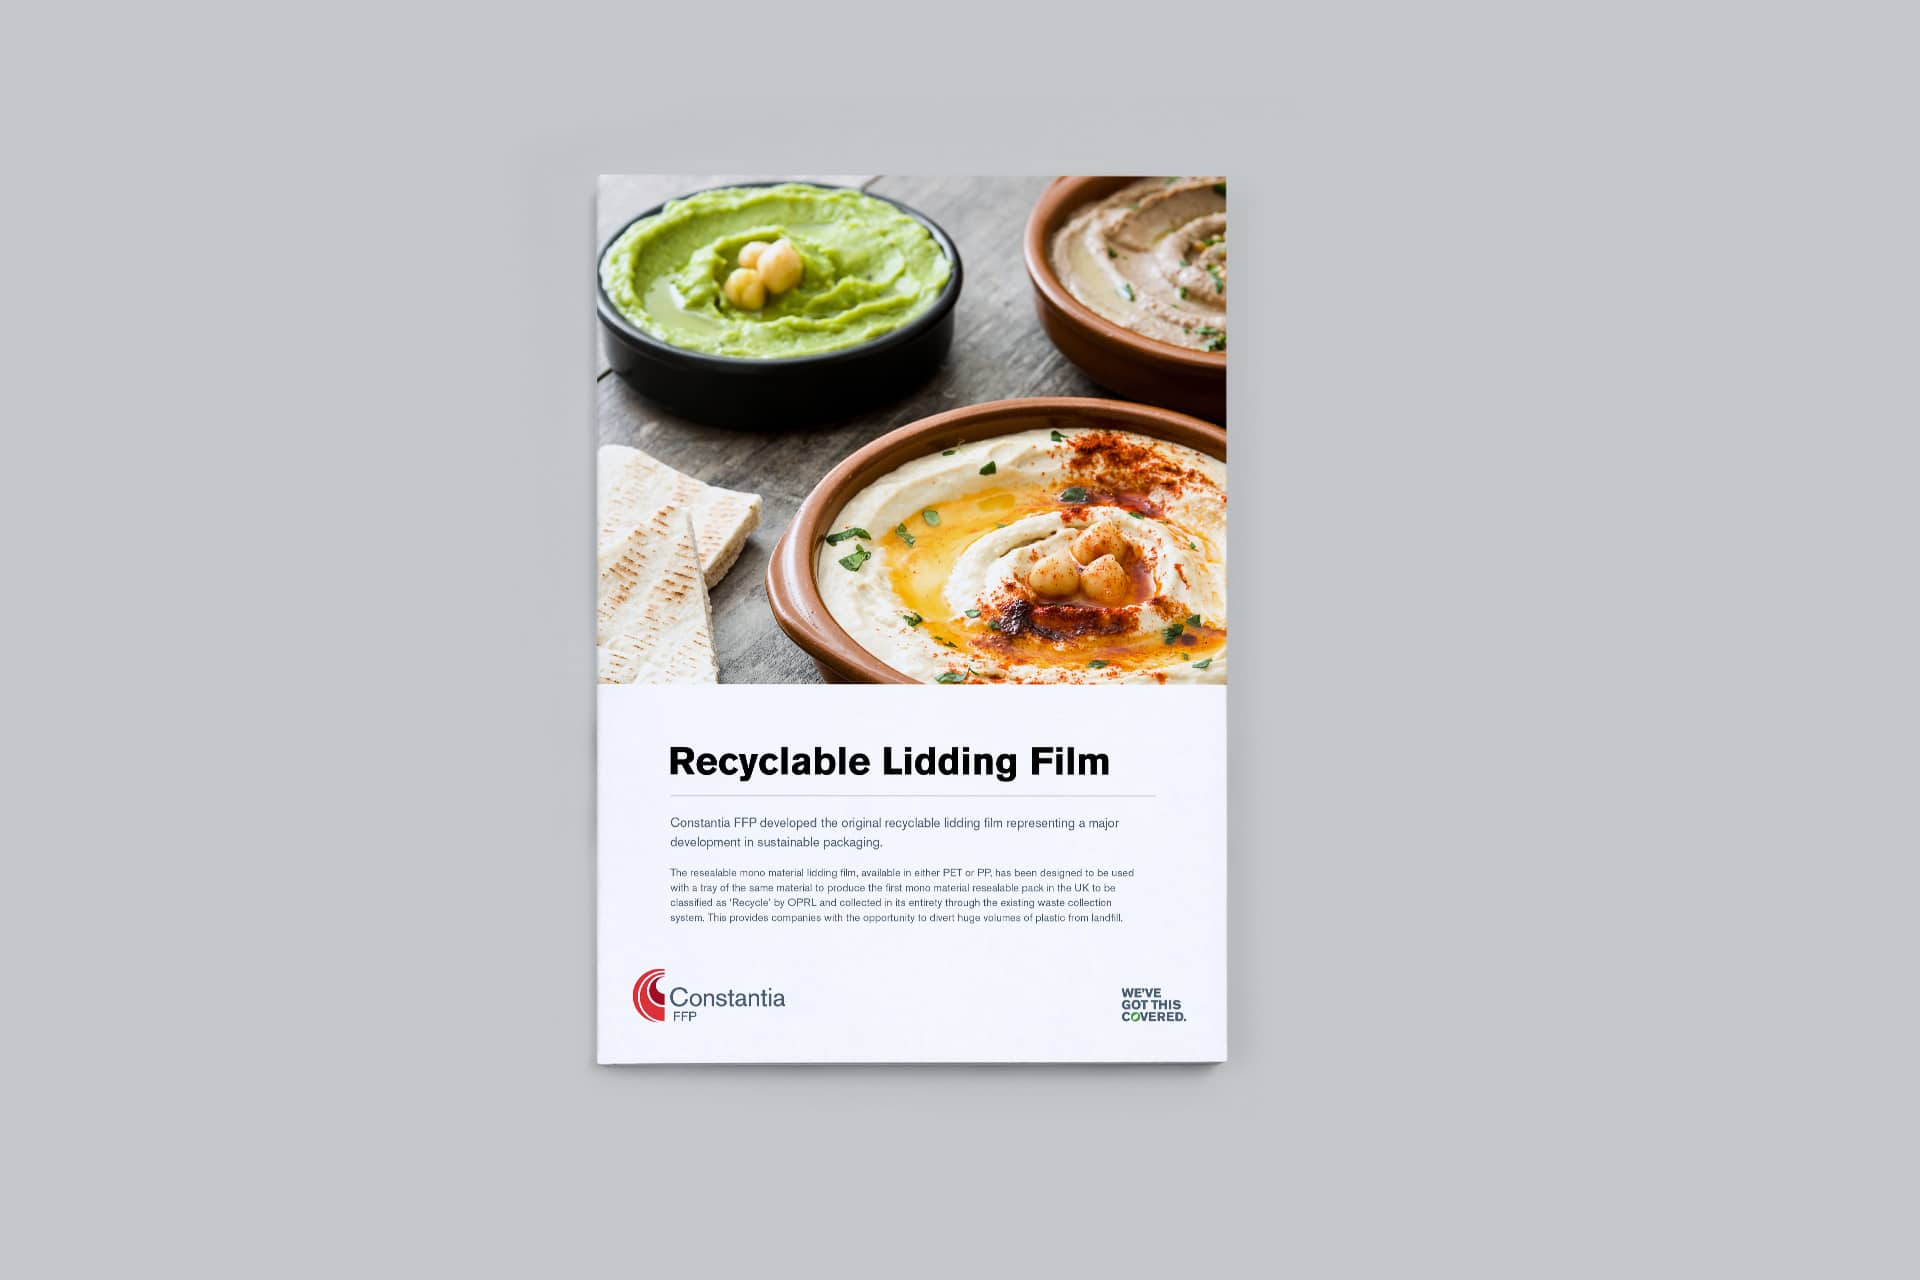 Recyclable Lidding Film